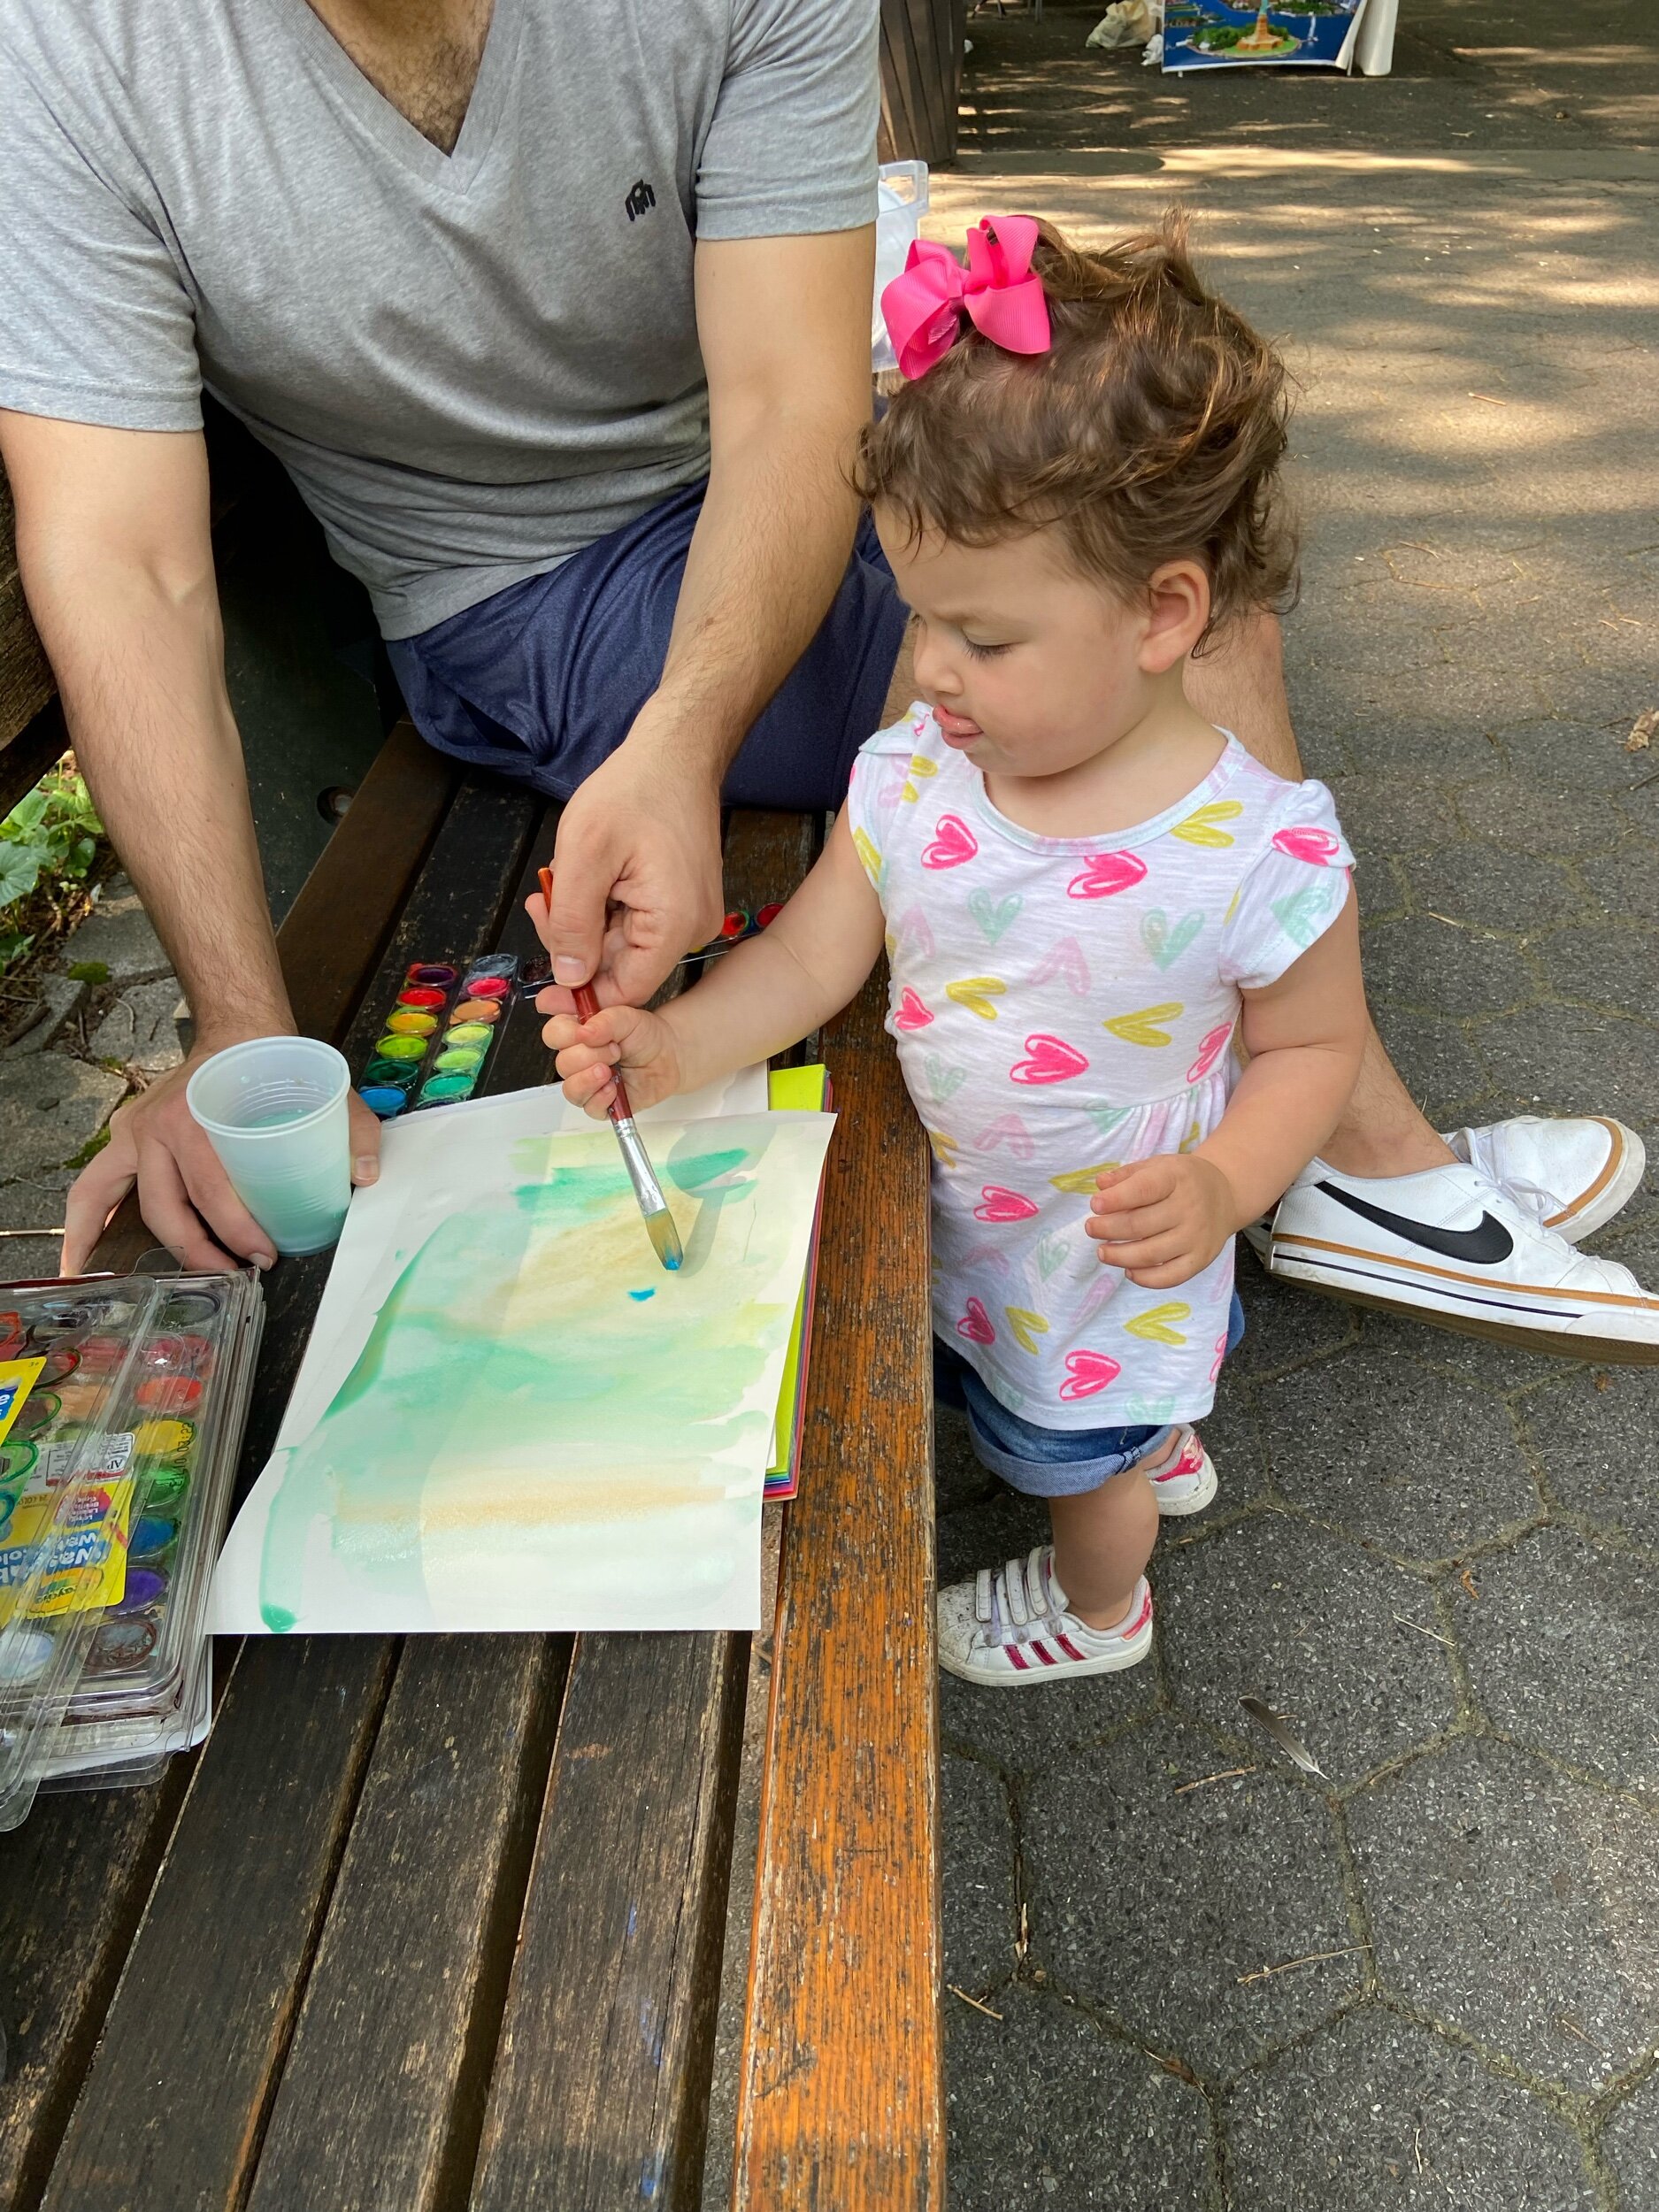 First time at watercolor - she loves it and takes it with her!!  (I forgot to take a photo of the artwork alone!!)